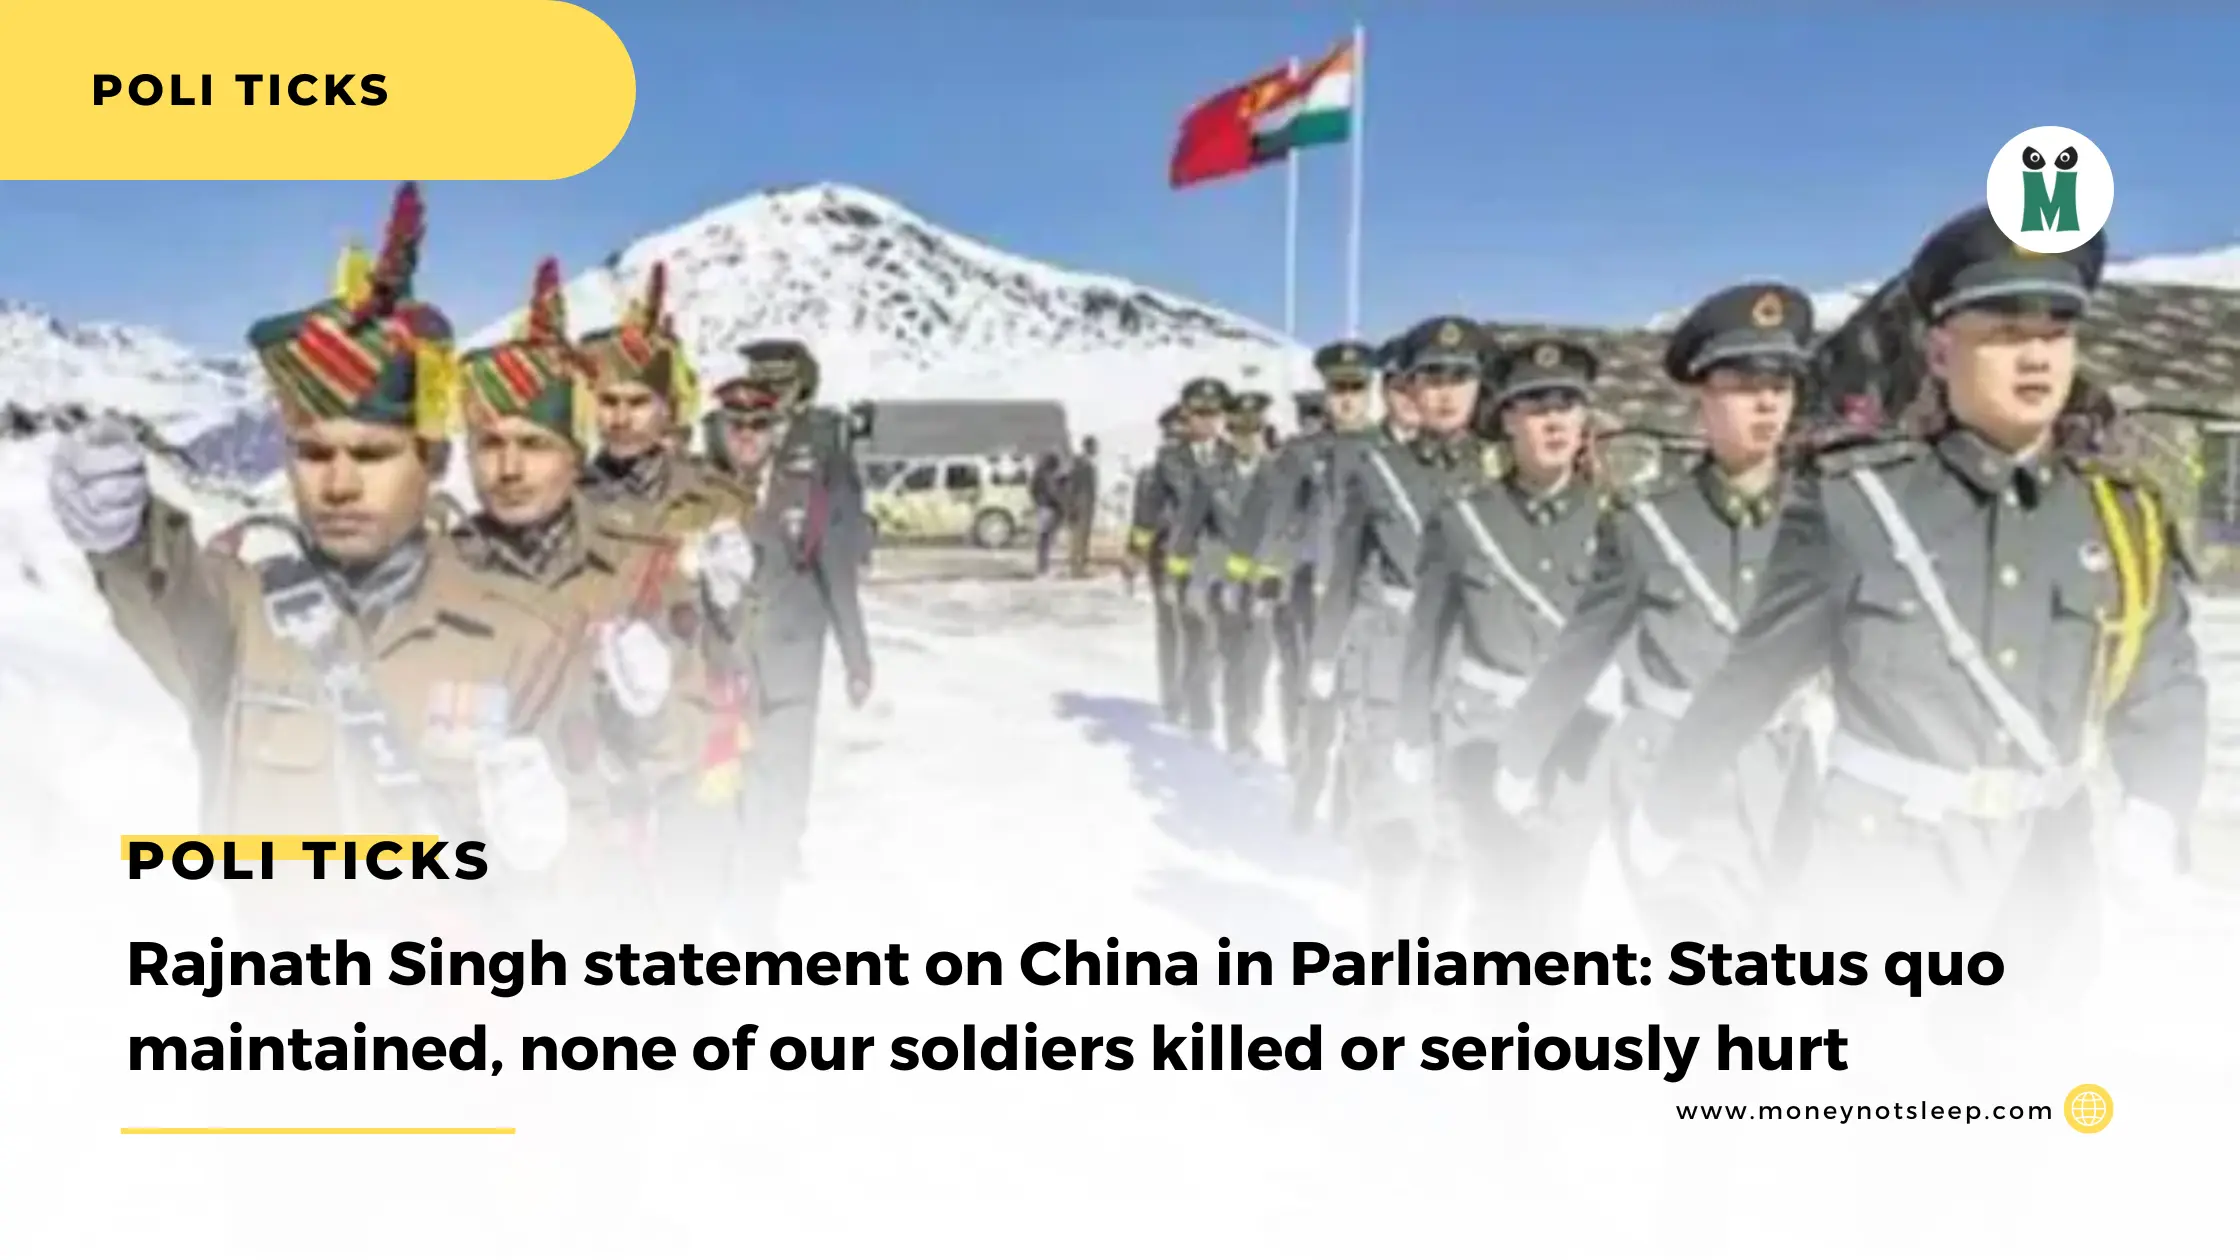 Indian & Chinese Army in Ladakh. Stand-off Rajnath Singh statement on China in Parliament: Status quo maintained, none of our soldiers killed or seriously hurt